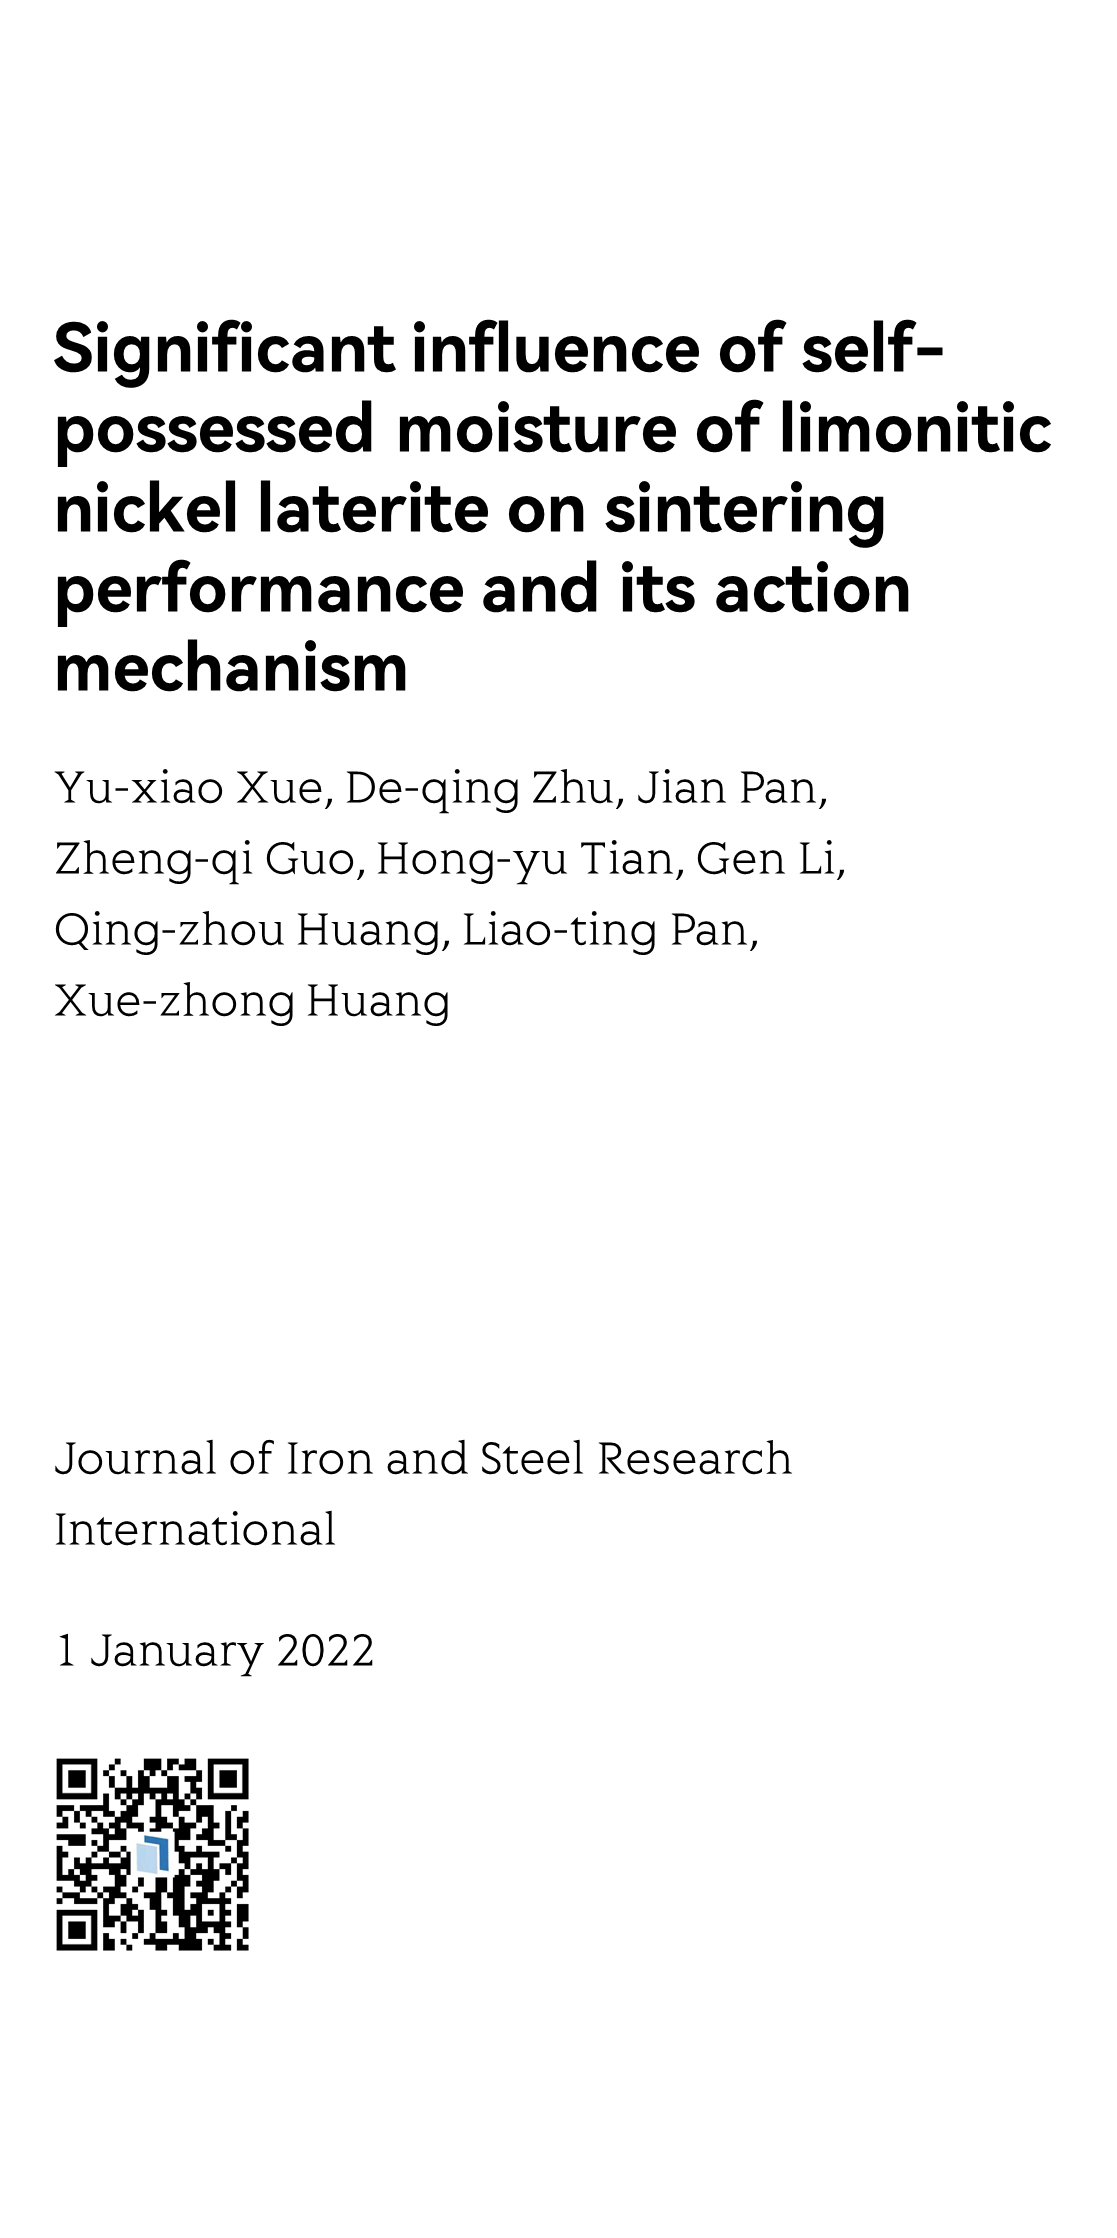 Journal of Iron and Steel Research International_1